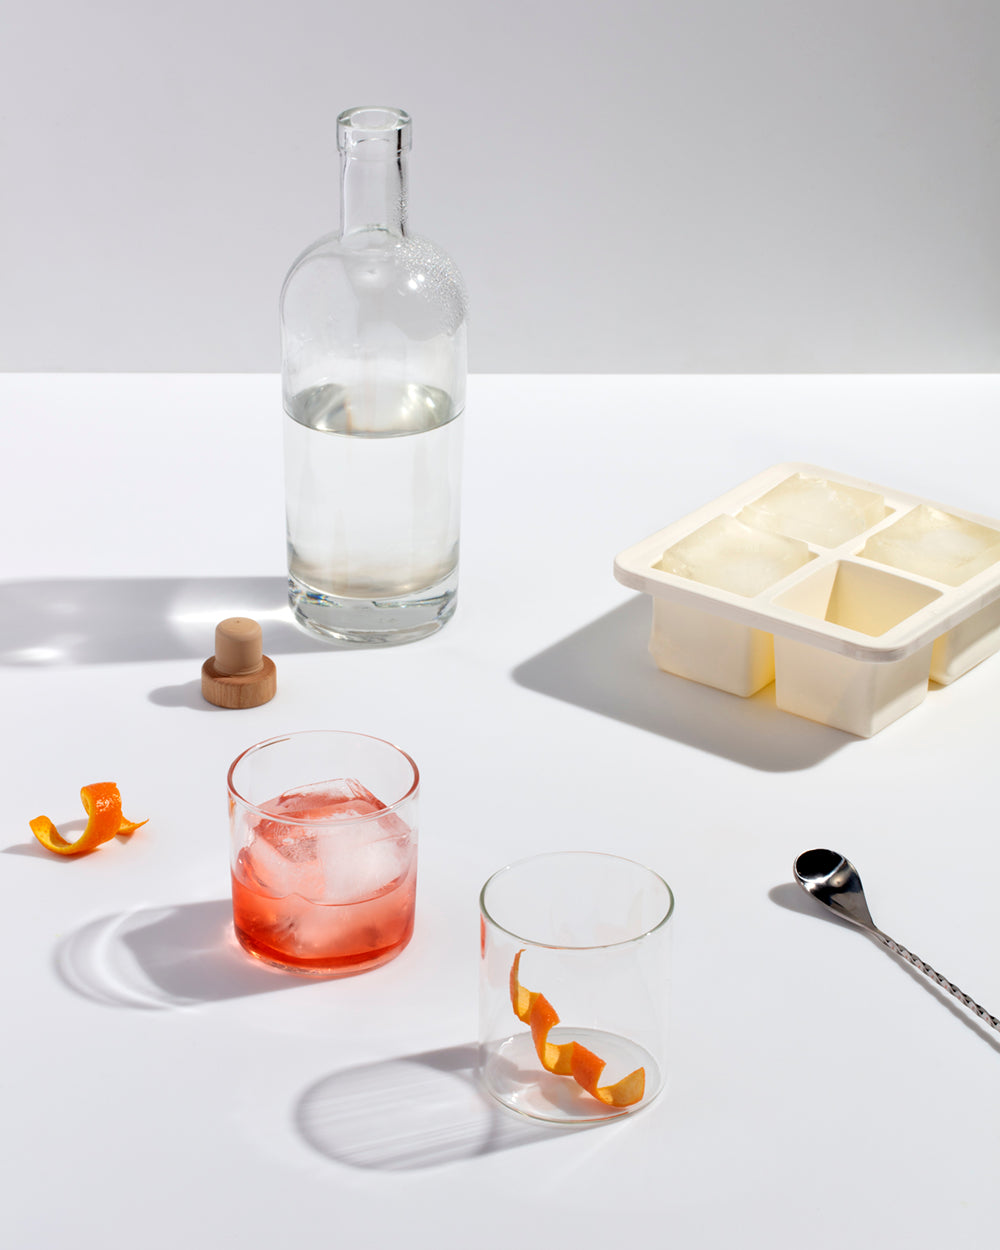 Large and Small Silicone Ice Cube Trays, Public Goods